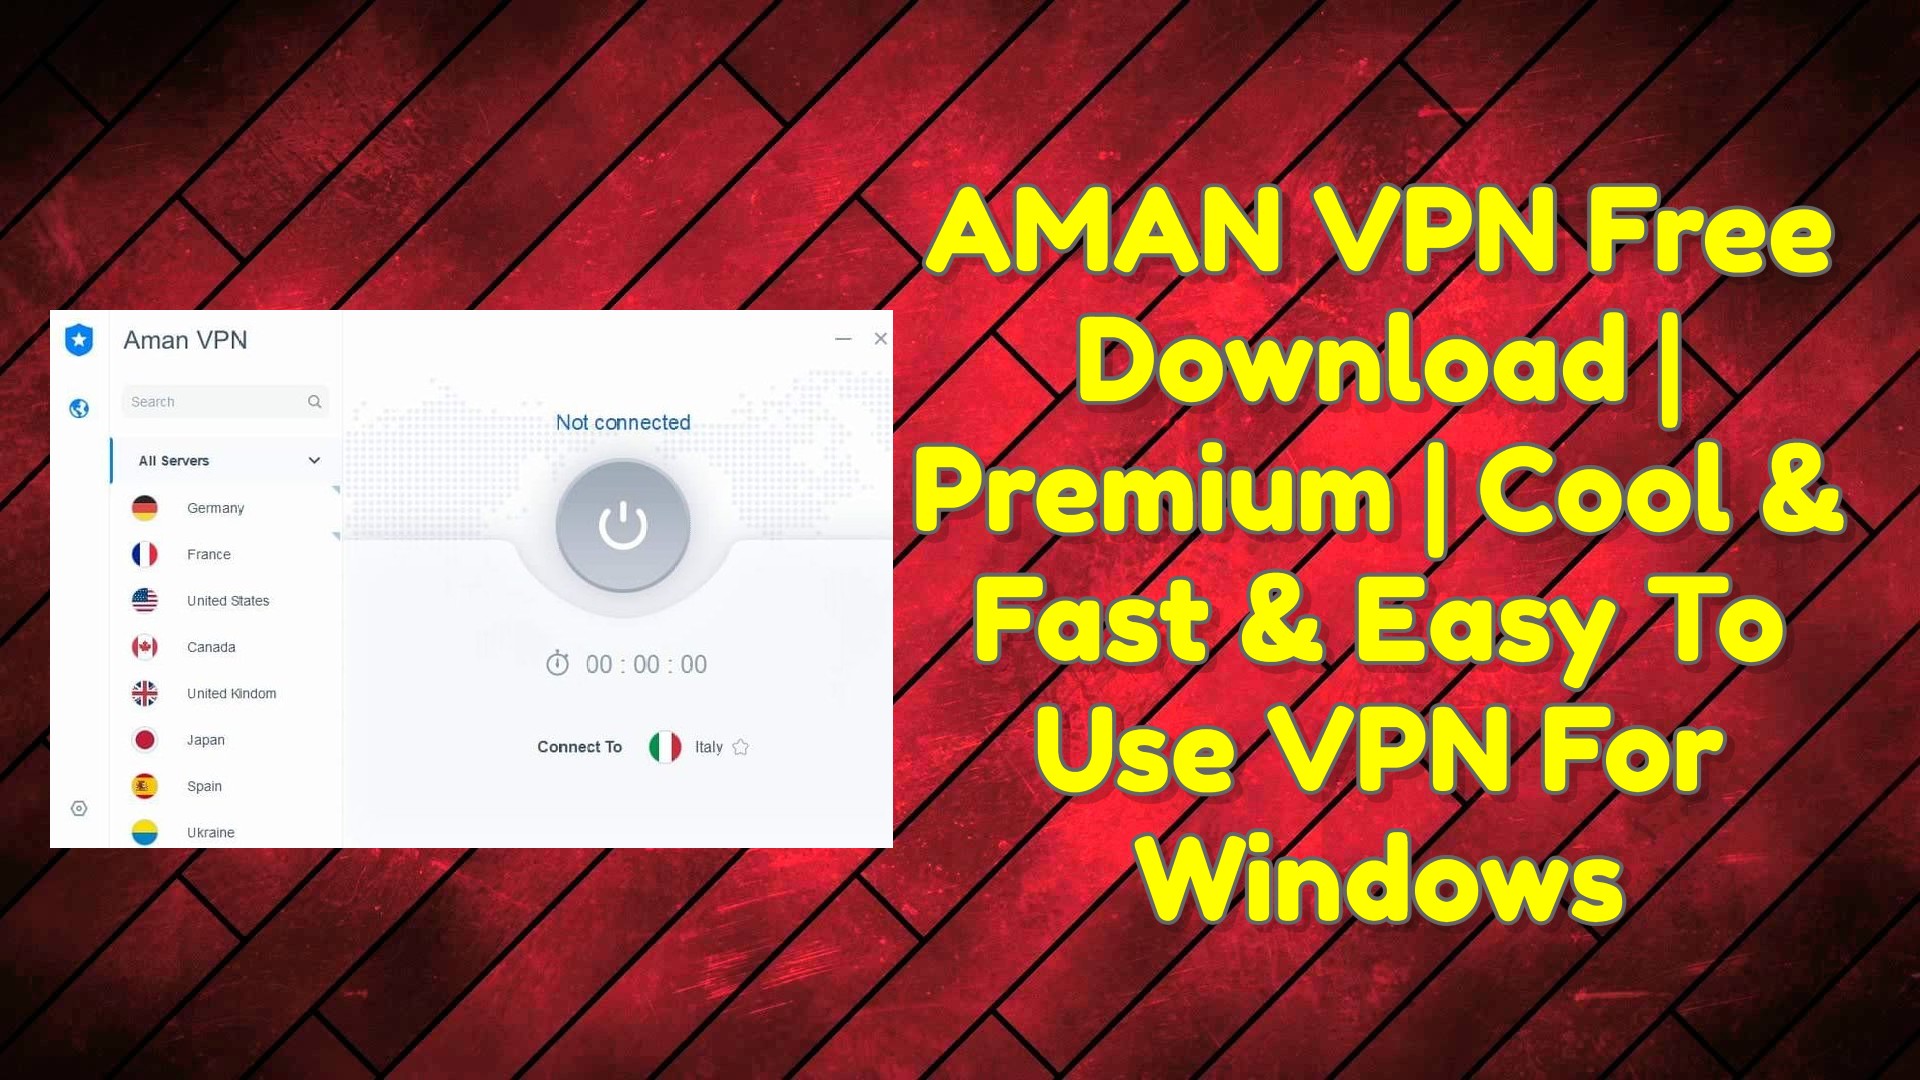 AmanVPN Free VPN Protects Data Privacy & Security